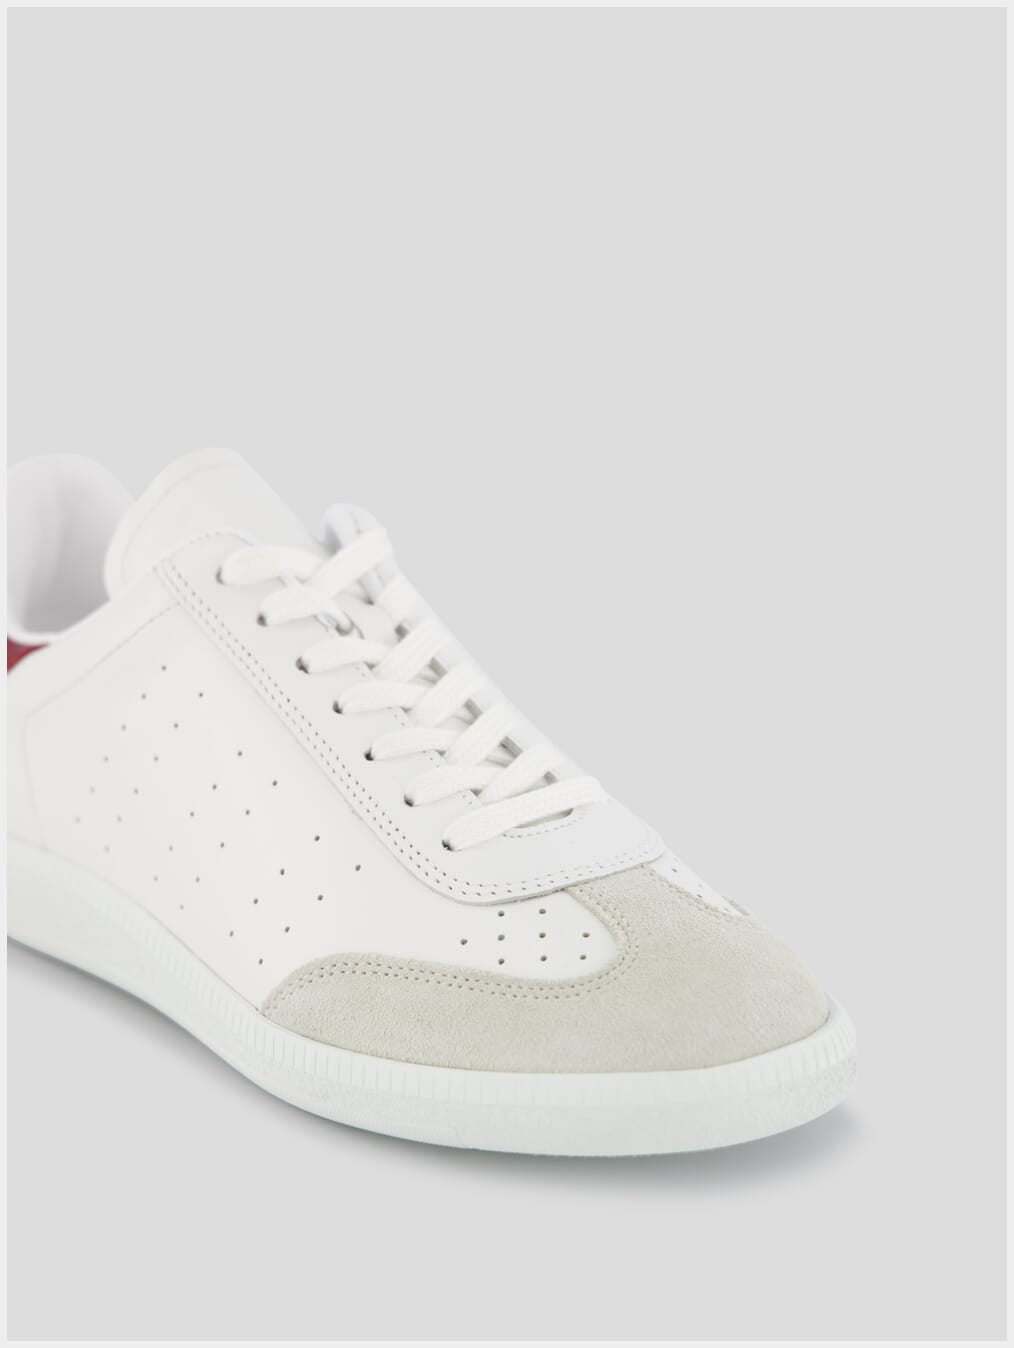 Isabel MarantBryce Leather Sneakers at Fashion Clinic